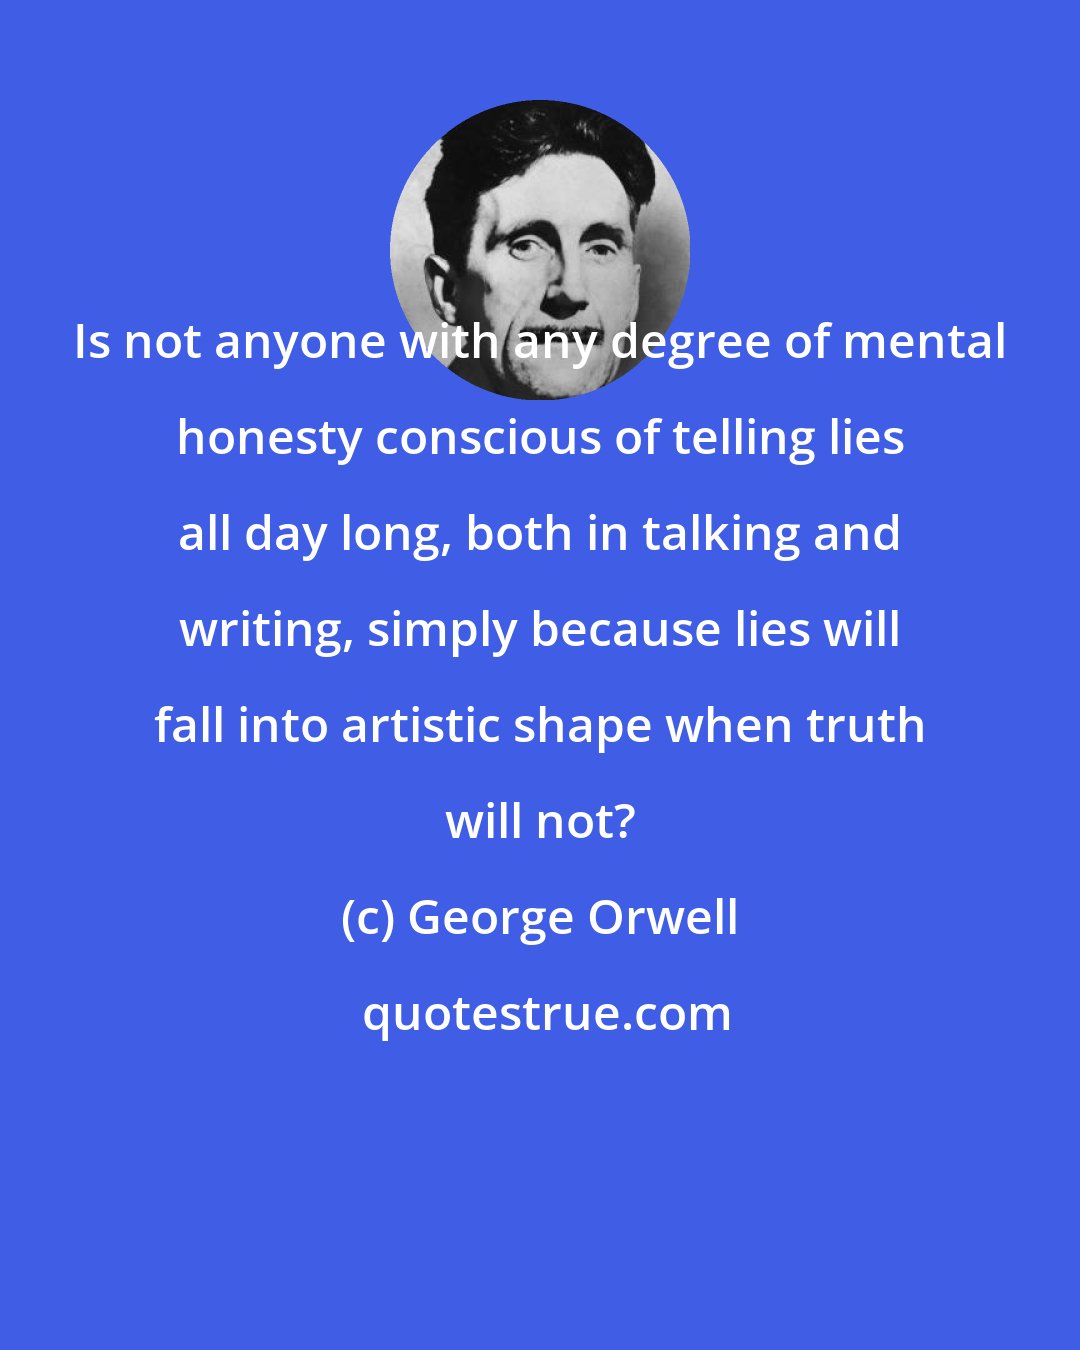 George Orwell: Is not anyone with any degree of mental honesty conscious of telling lies all day long, both in talking and writing, simply because lies will fall into artistic shape when truth will not?